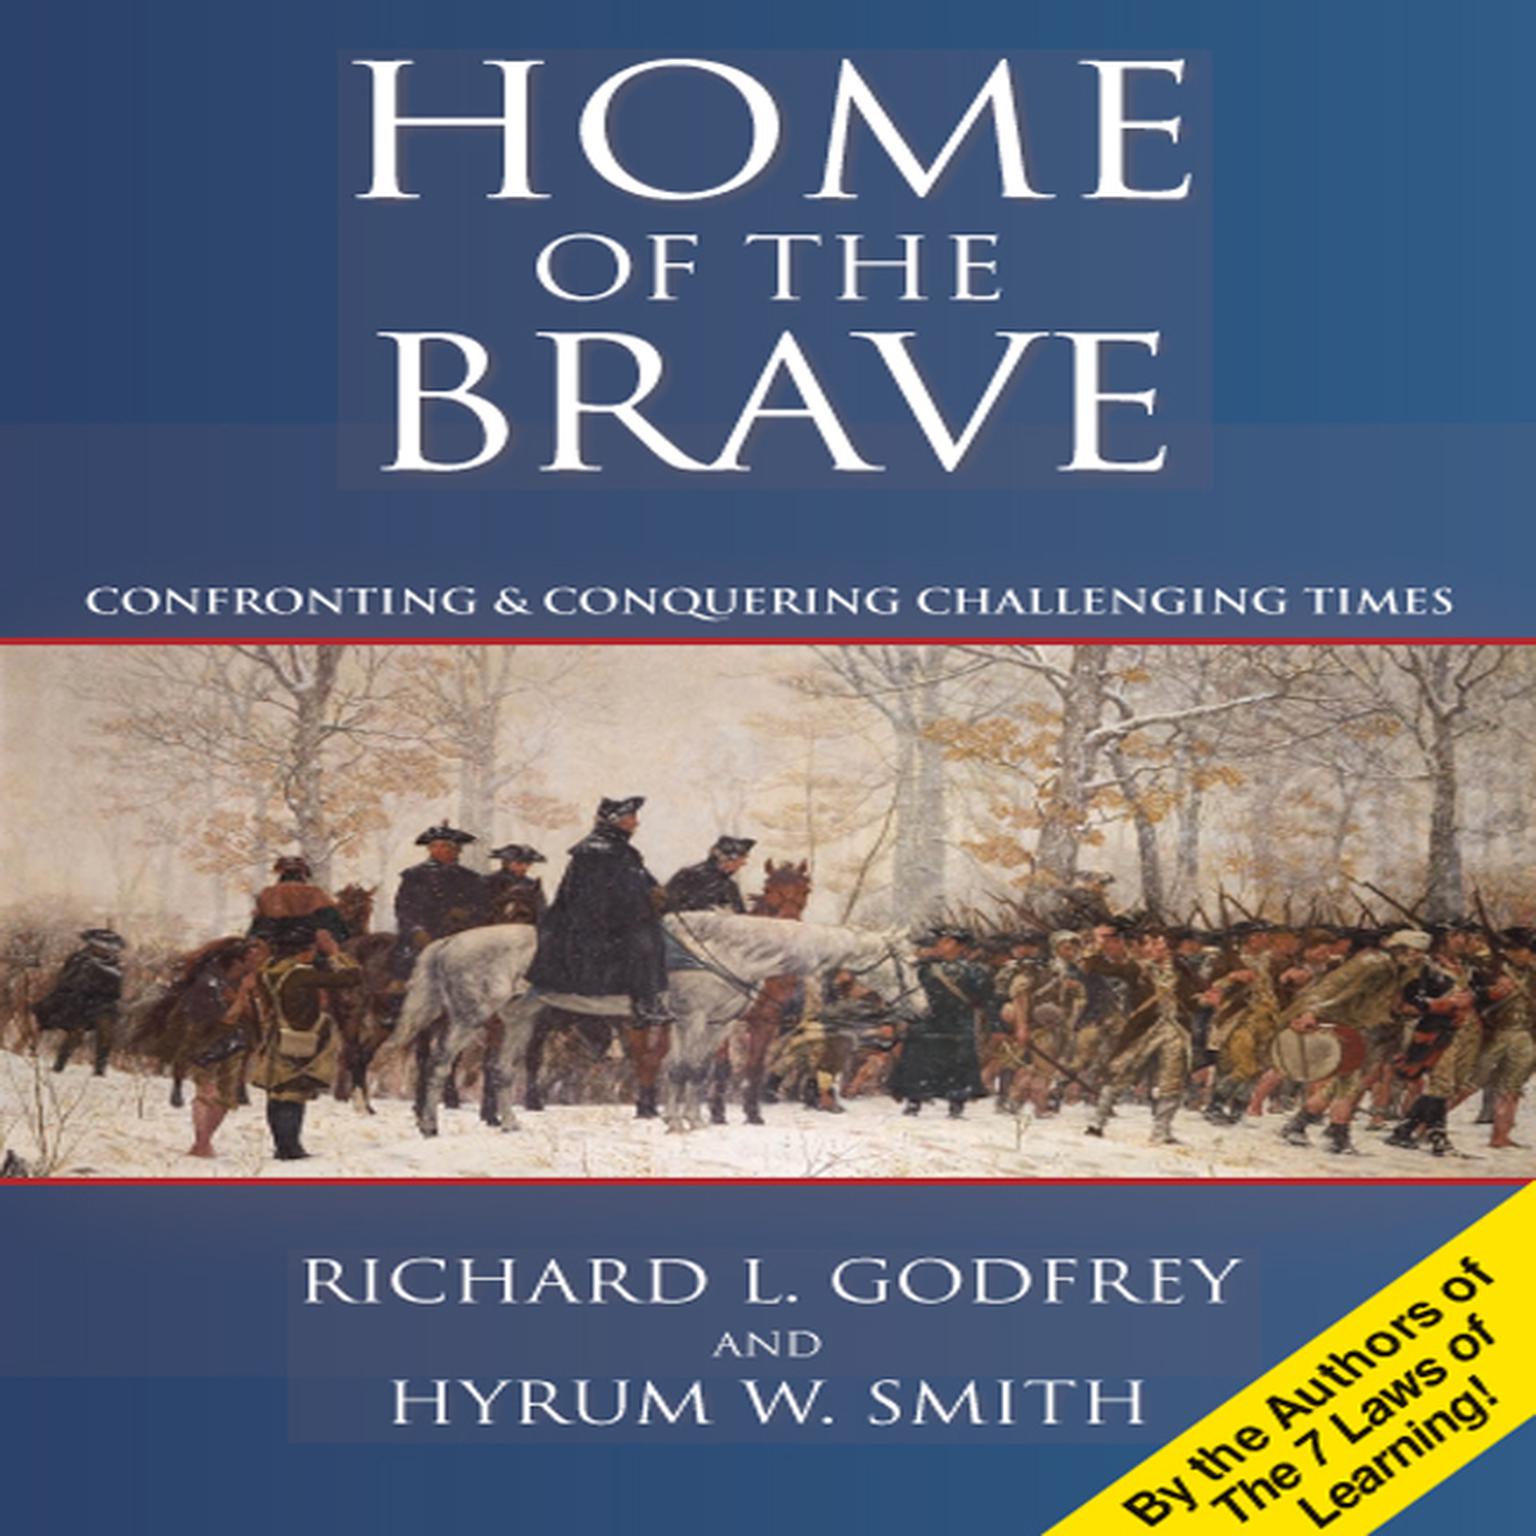 Home of the Brave: Confronting & Conquering Challenging Time Audiobook, by Richard L. Godfrey